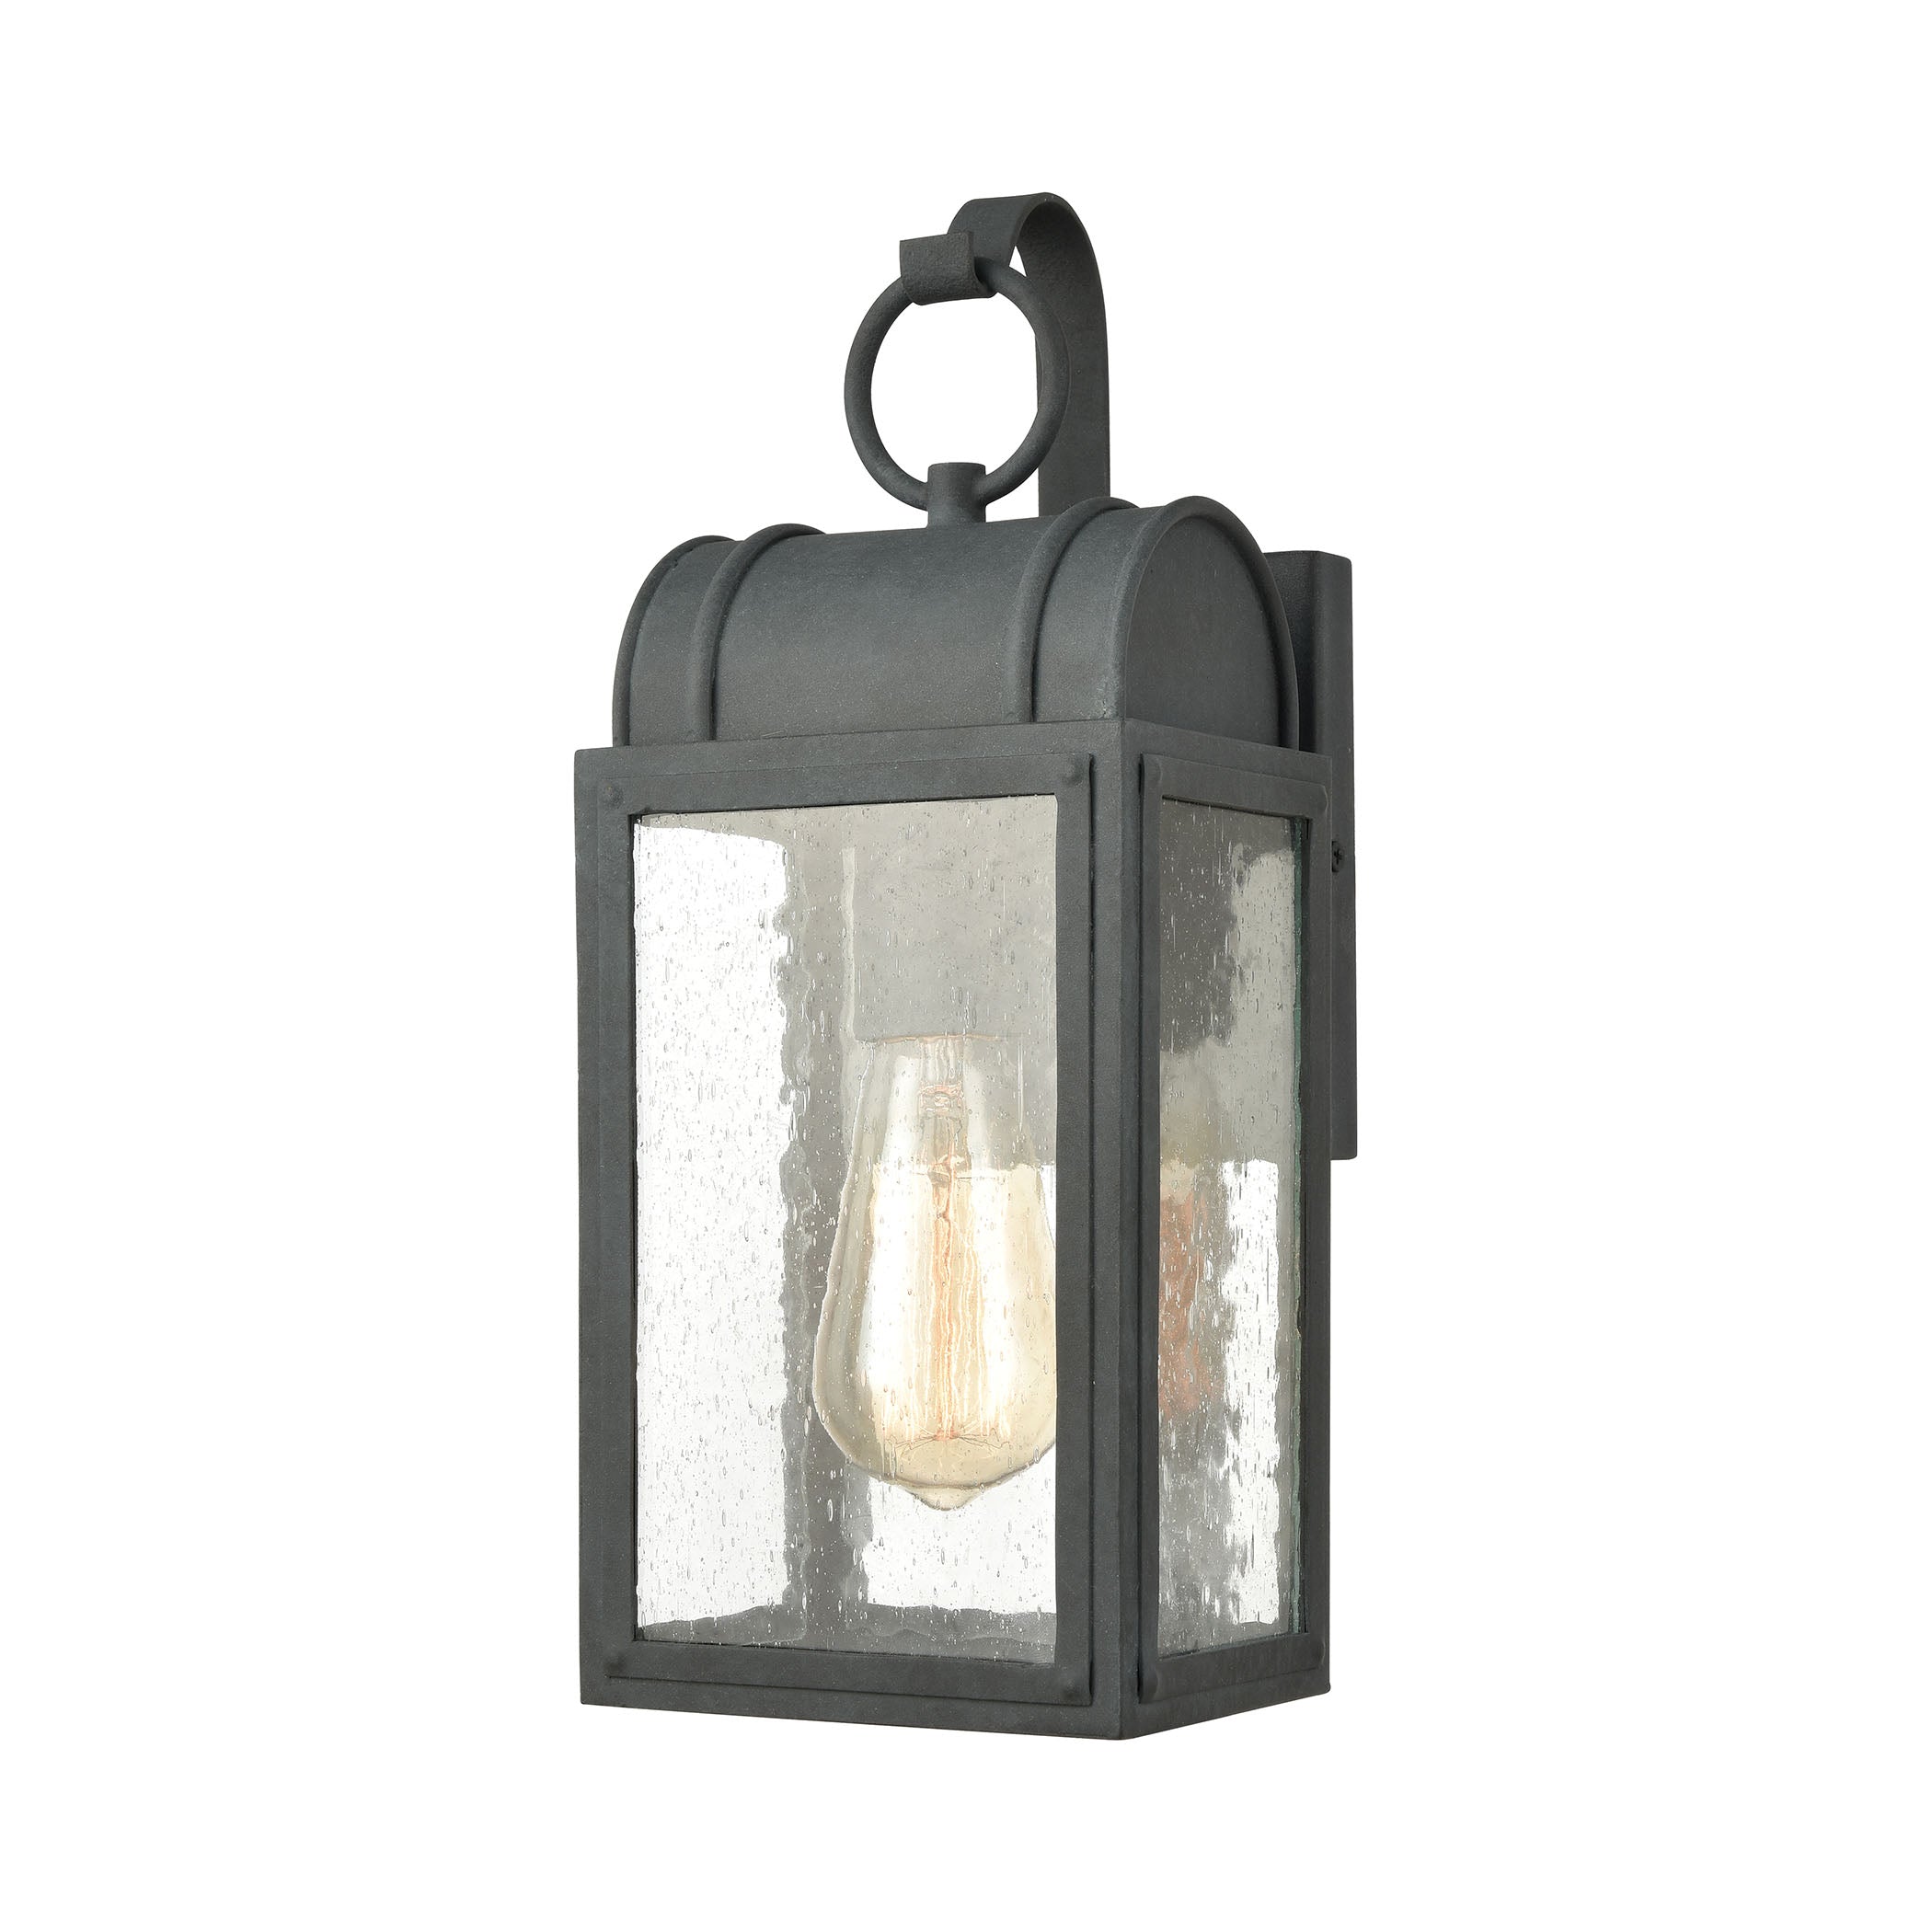 ELK Lighting 45480/1 Heritage Hills 1-Light Outdoor Sconce in Aged Zinc with Seedy Glass Enclosure